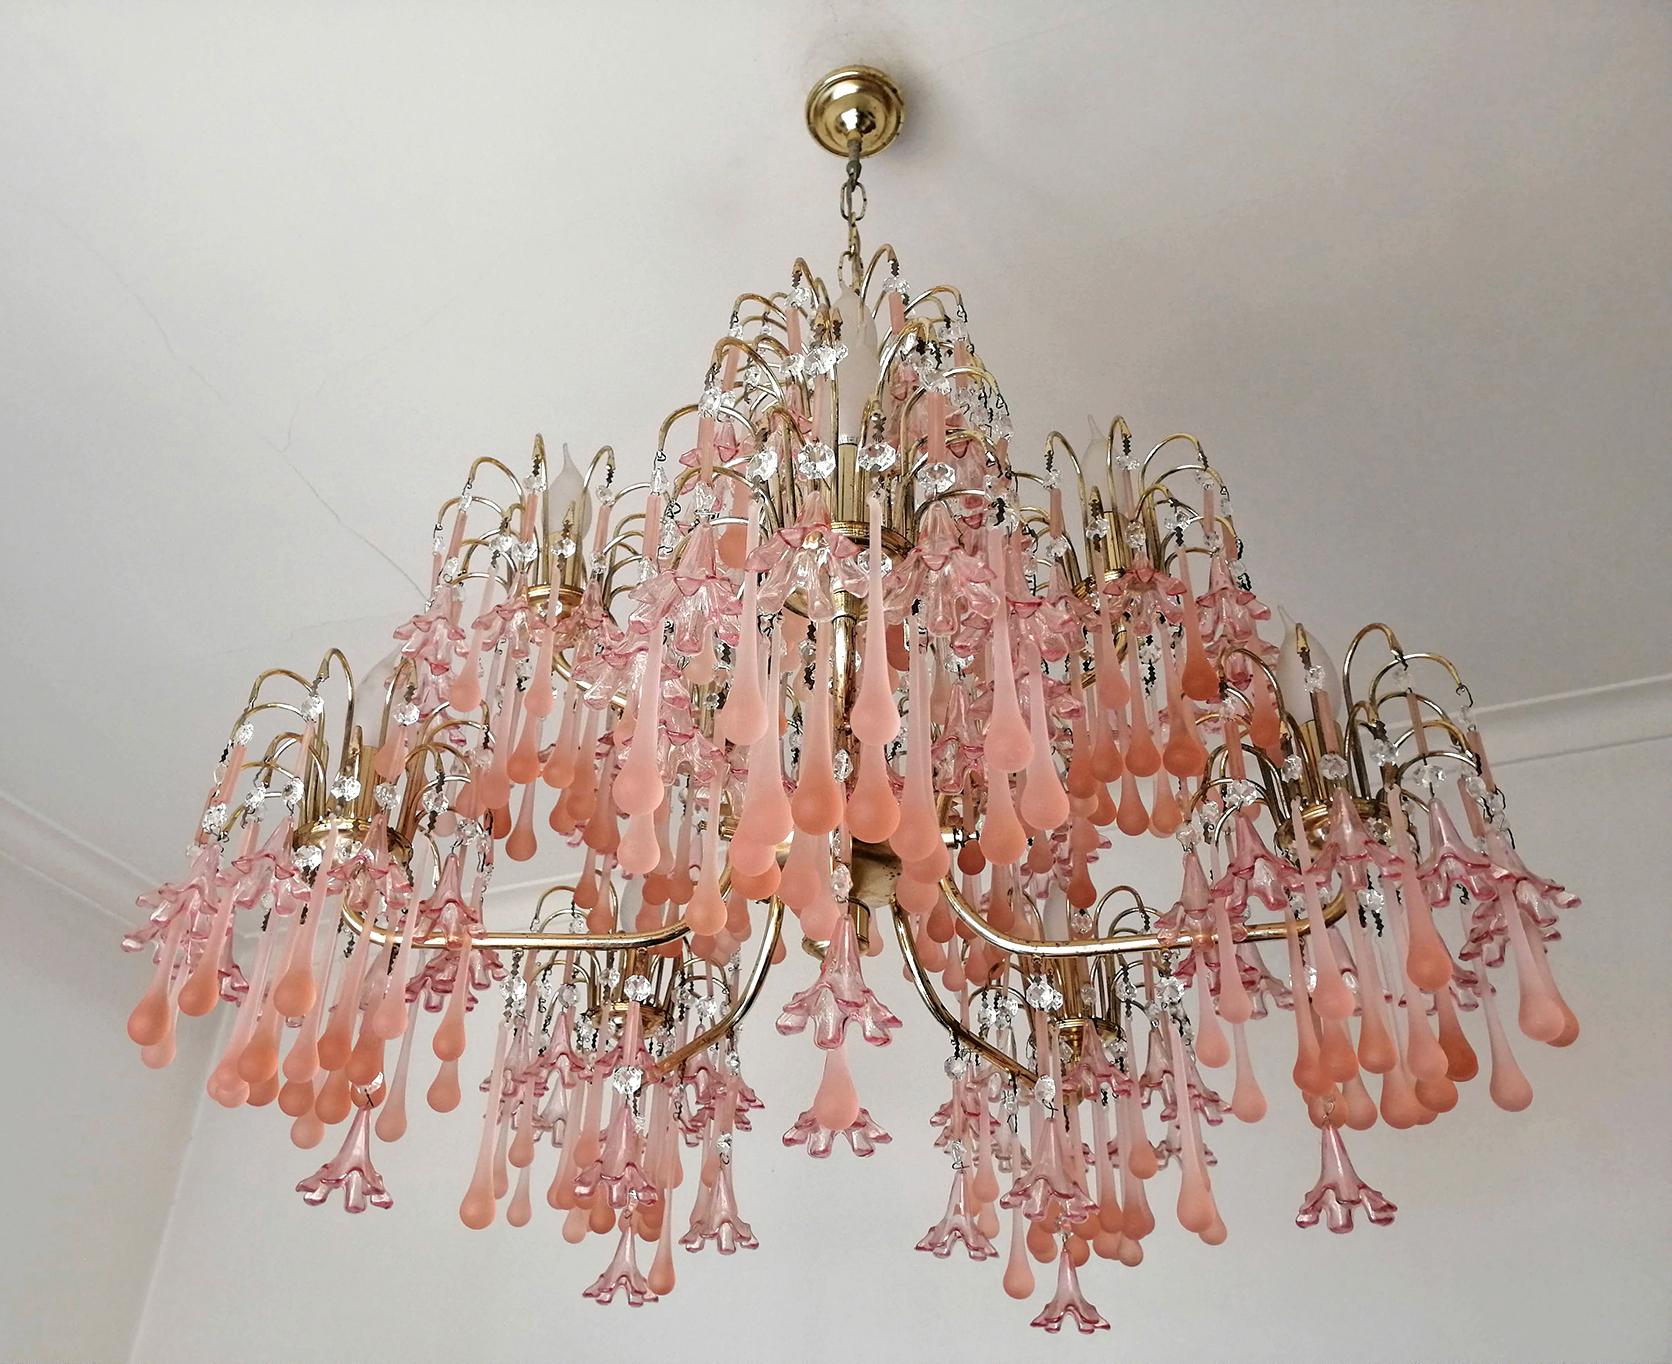 Amazing midcentury Italian Murano chandelier in the style of Venini.
Pink fogged crystal teardrops, pink glass flowers waterfall and gilt brass 31 tiers wedding cake chandelier.
Measures:
Diameter 29.92 in/ 76 cm
Height 35.43 in / 90 cm
10 light